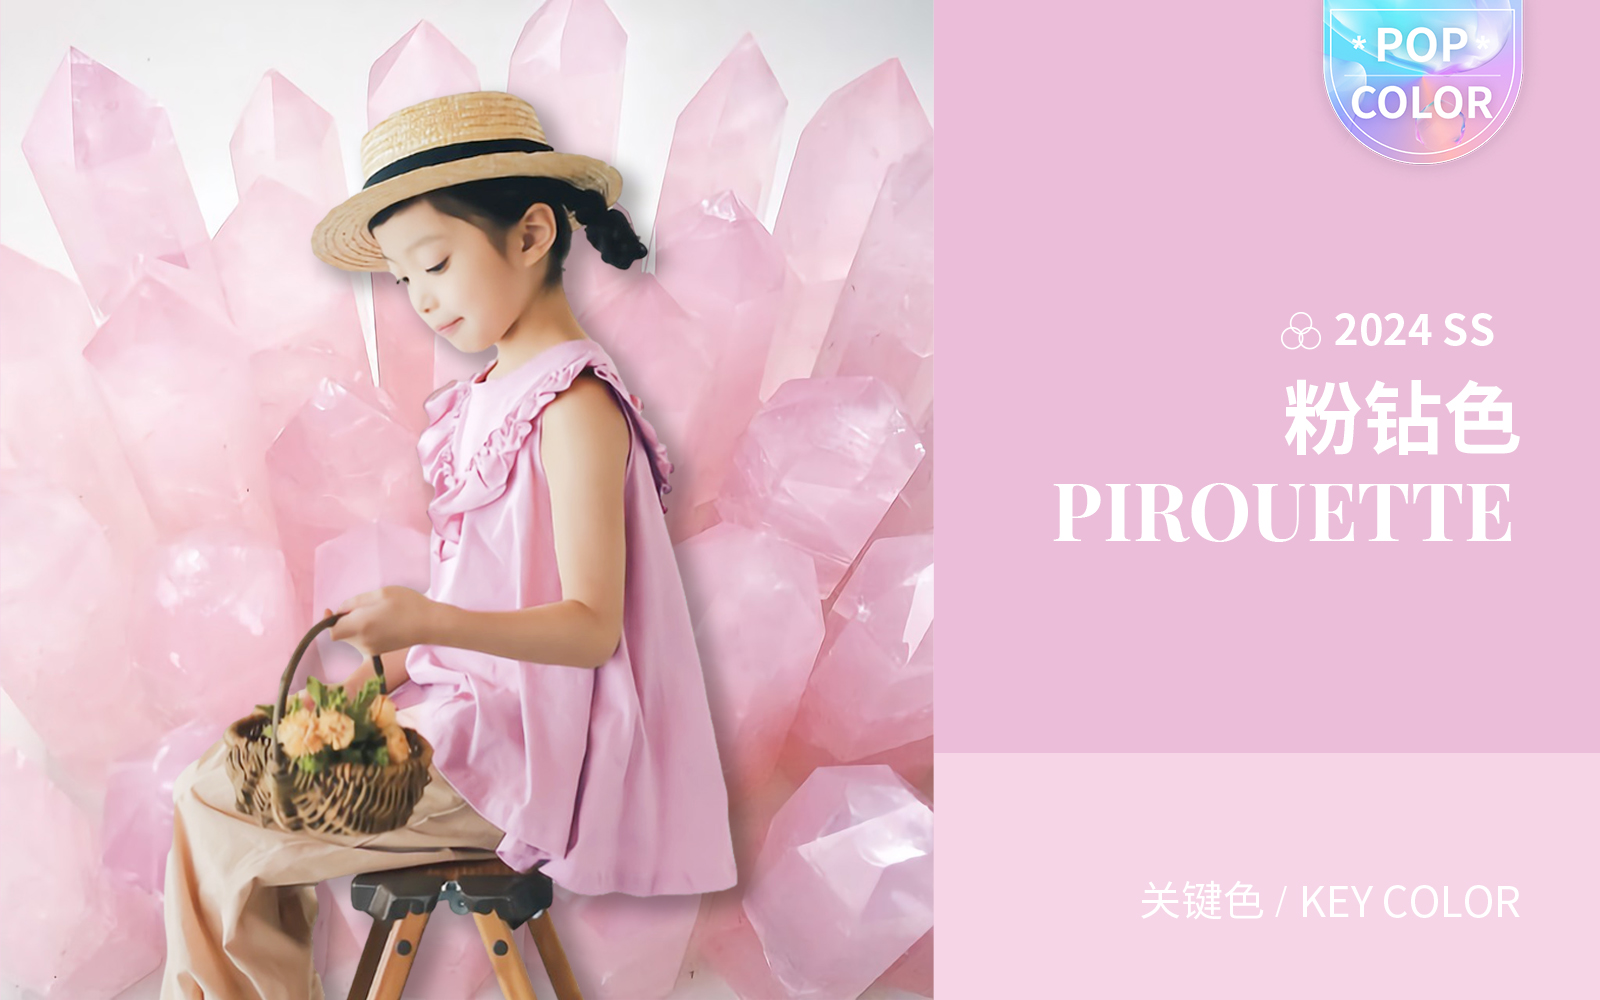 Pirouette -- The Color Trend for Girlswear